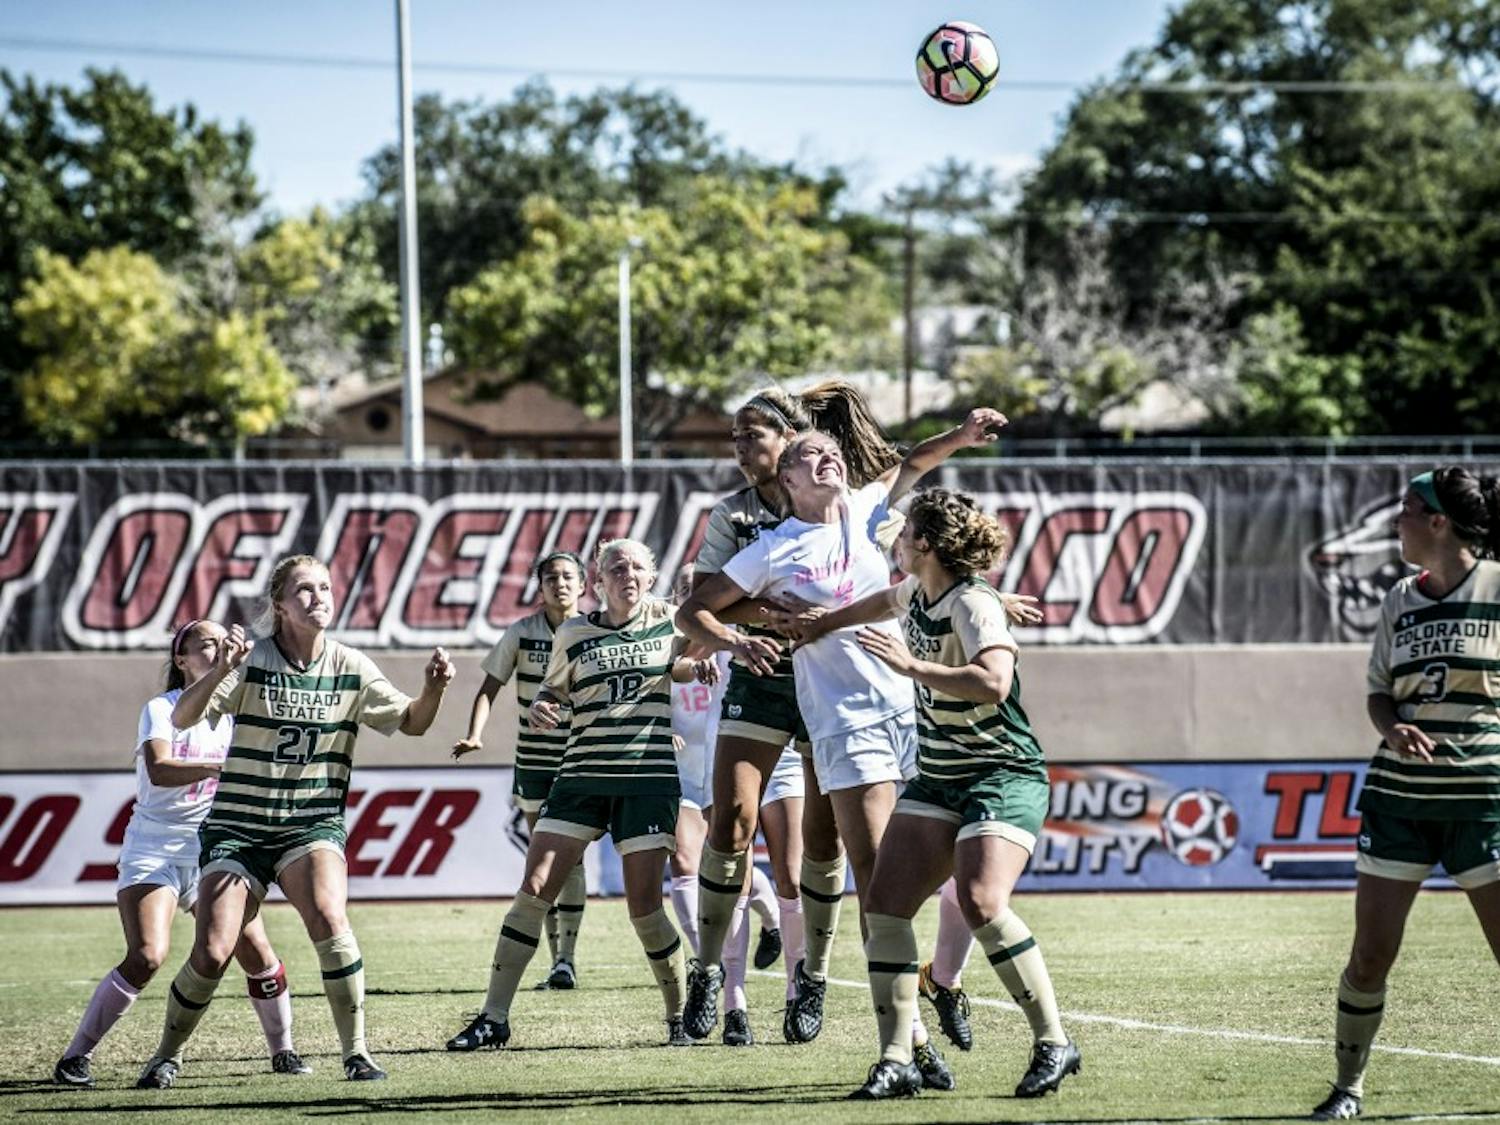 UNM midfielder Jessie Hix prepares to score on a header during a game against Colorado State University on Oct. 20, 2017. Hix has scored seven goals this season &mdash; six of those goals have been with her head.